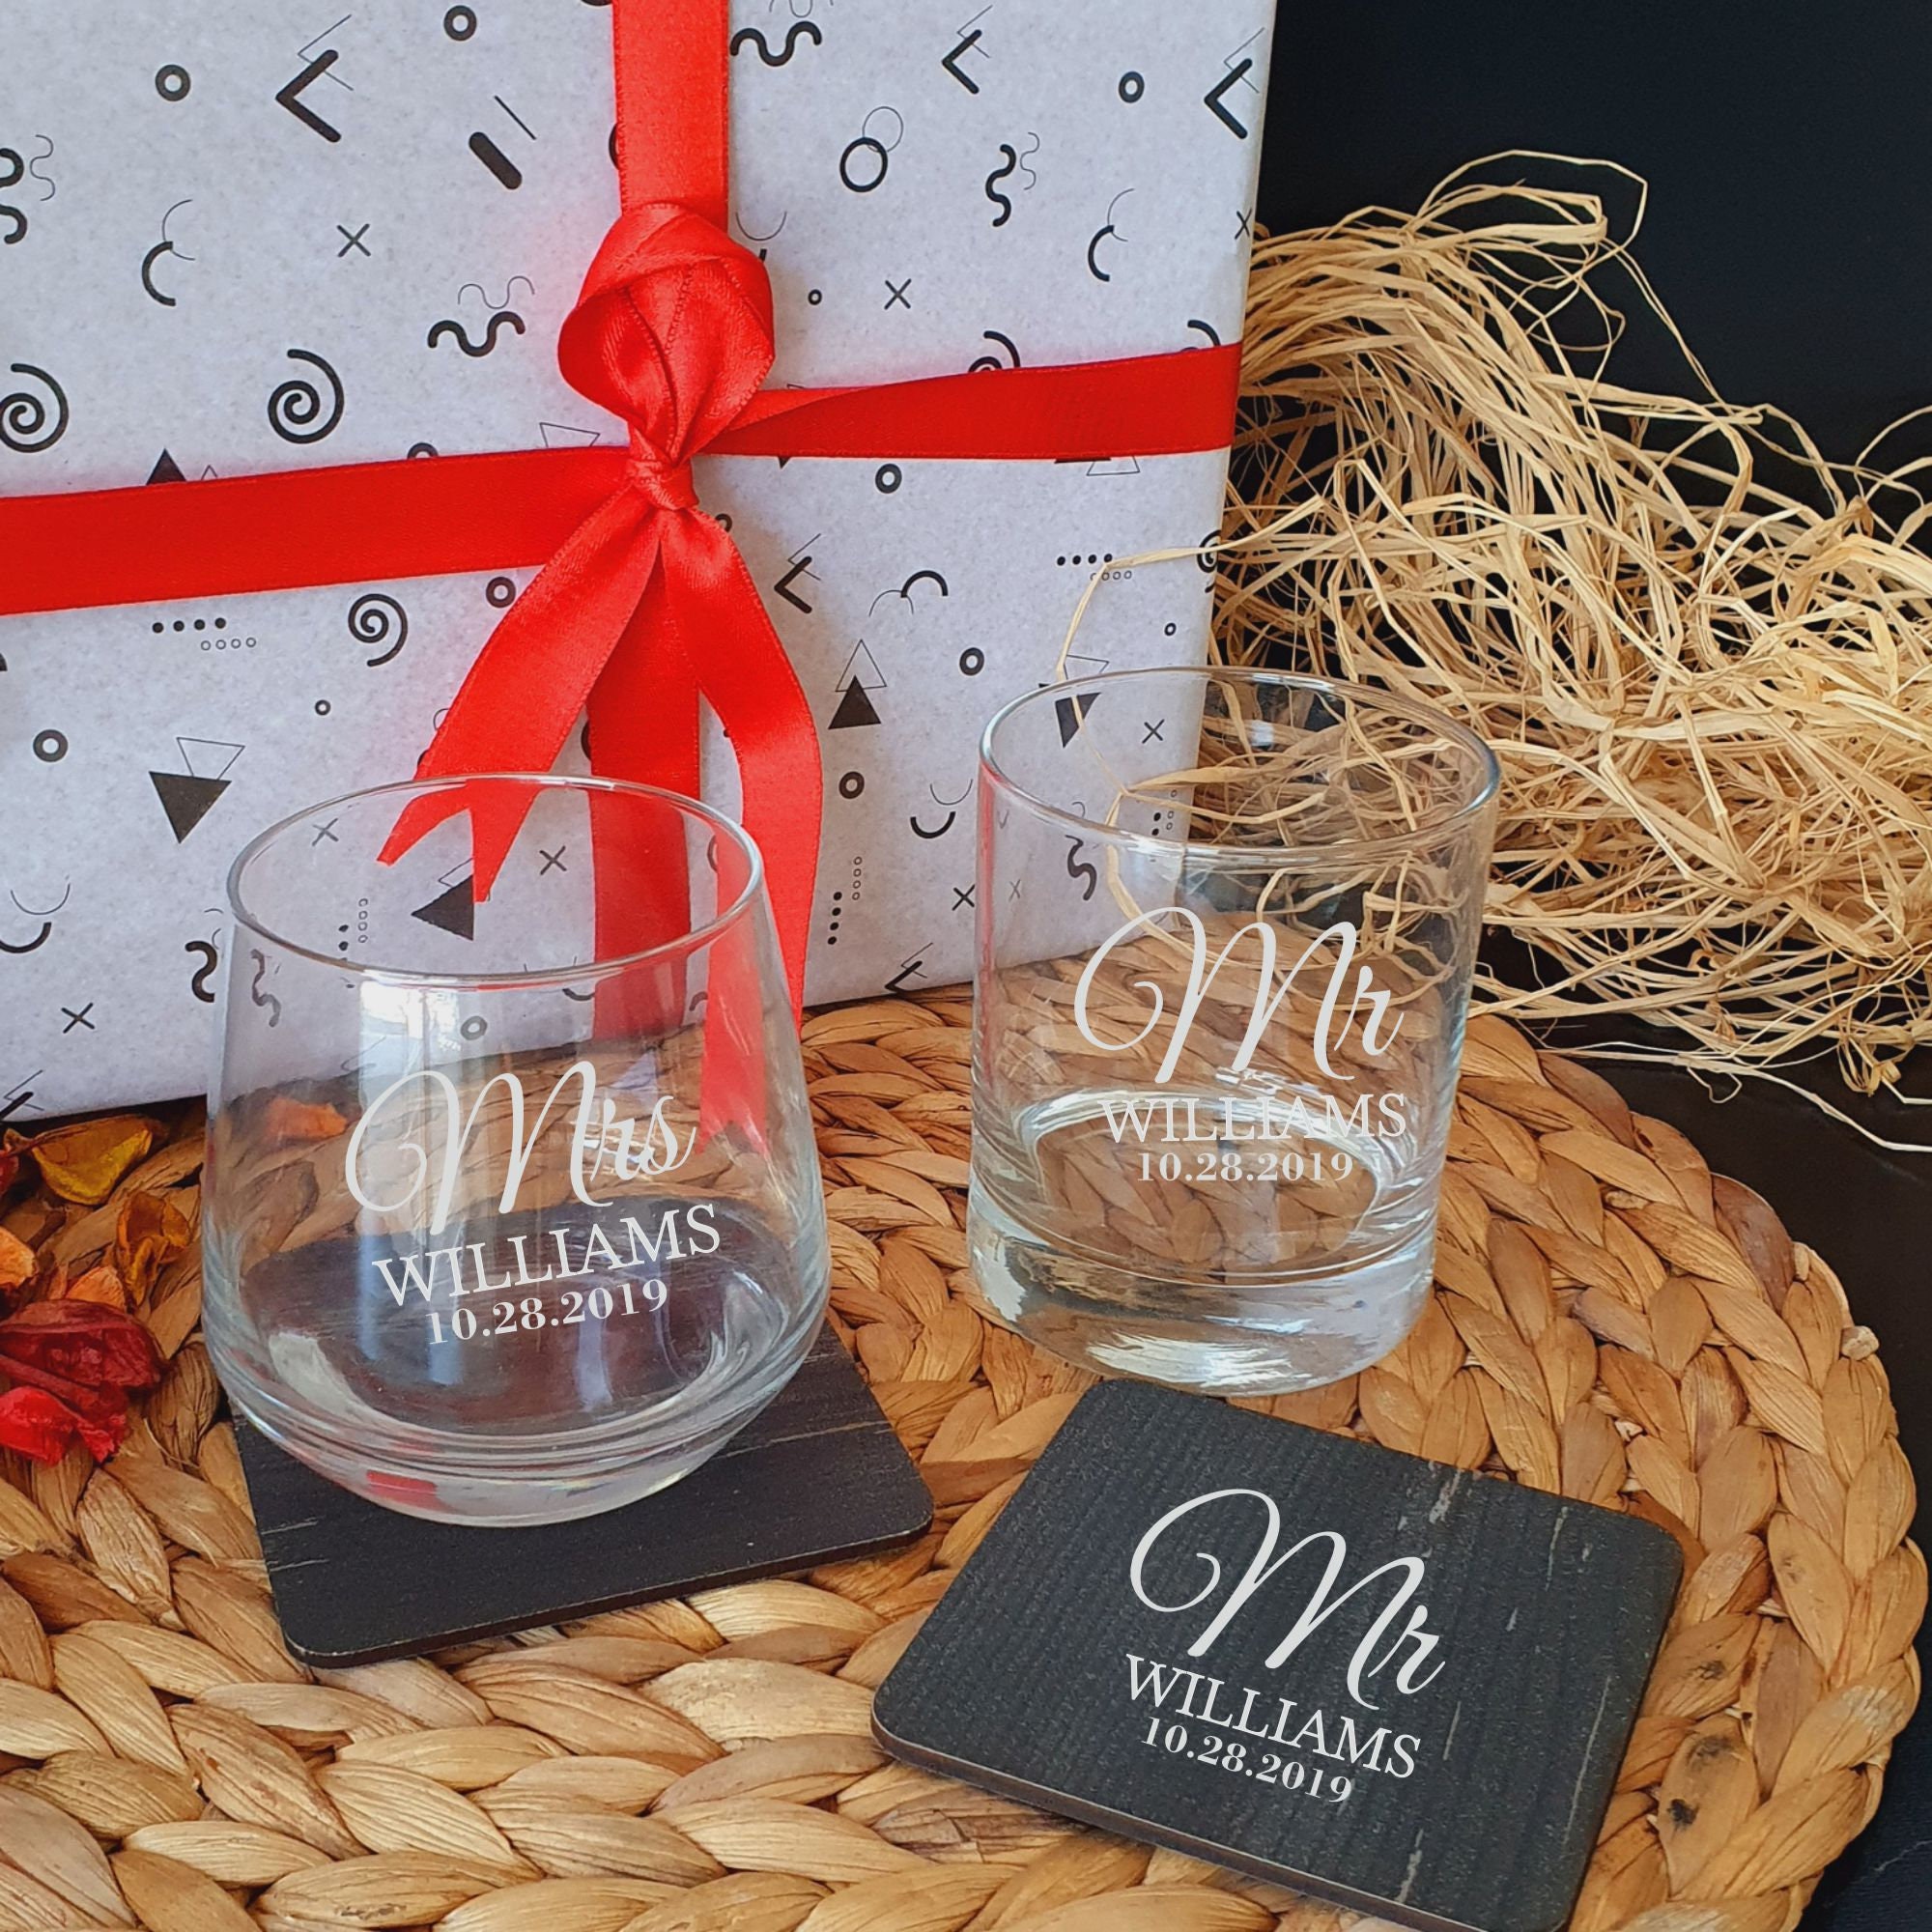 Personalized Stemless Wine glass set, Mr and Mrs, Wedding glasses, Wed –  Julies Heart